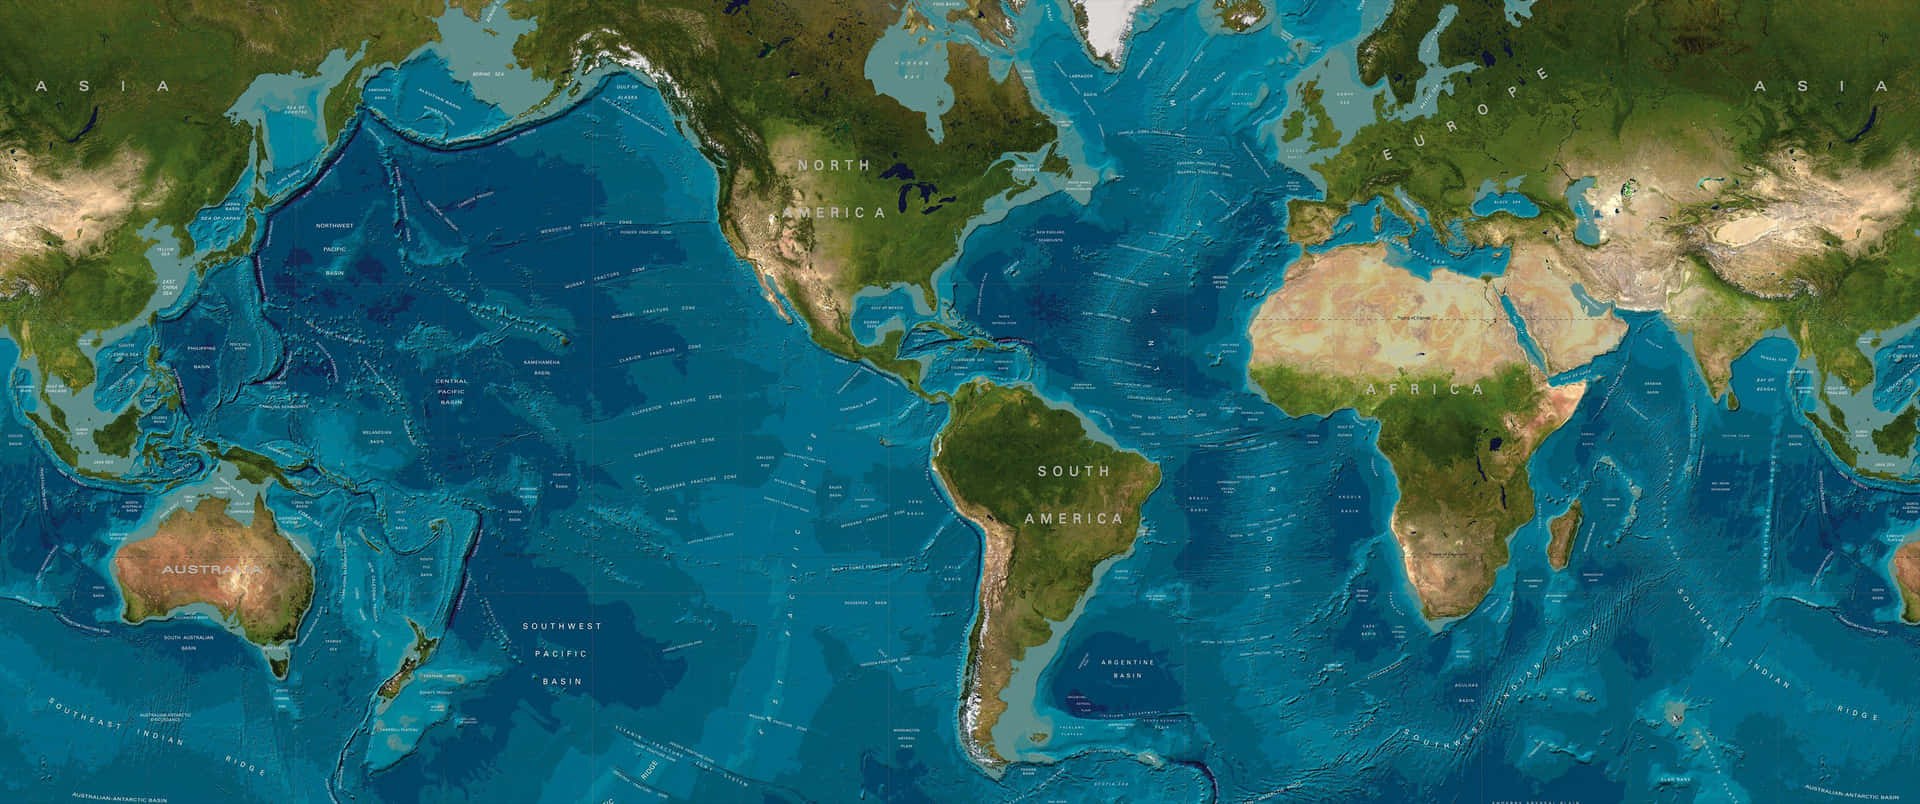 3440x1440 Uhd Earth Map Picture